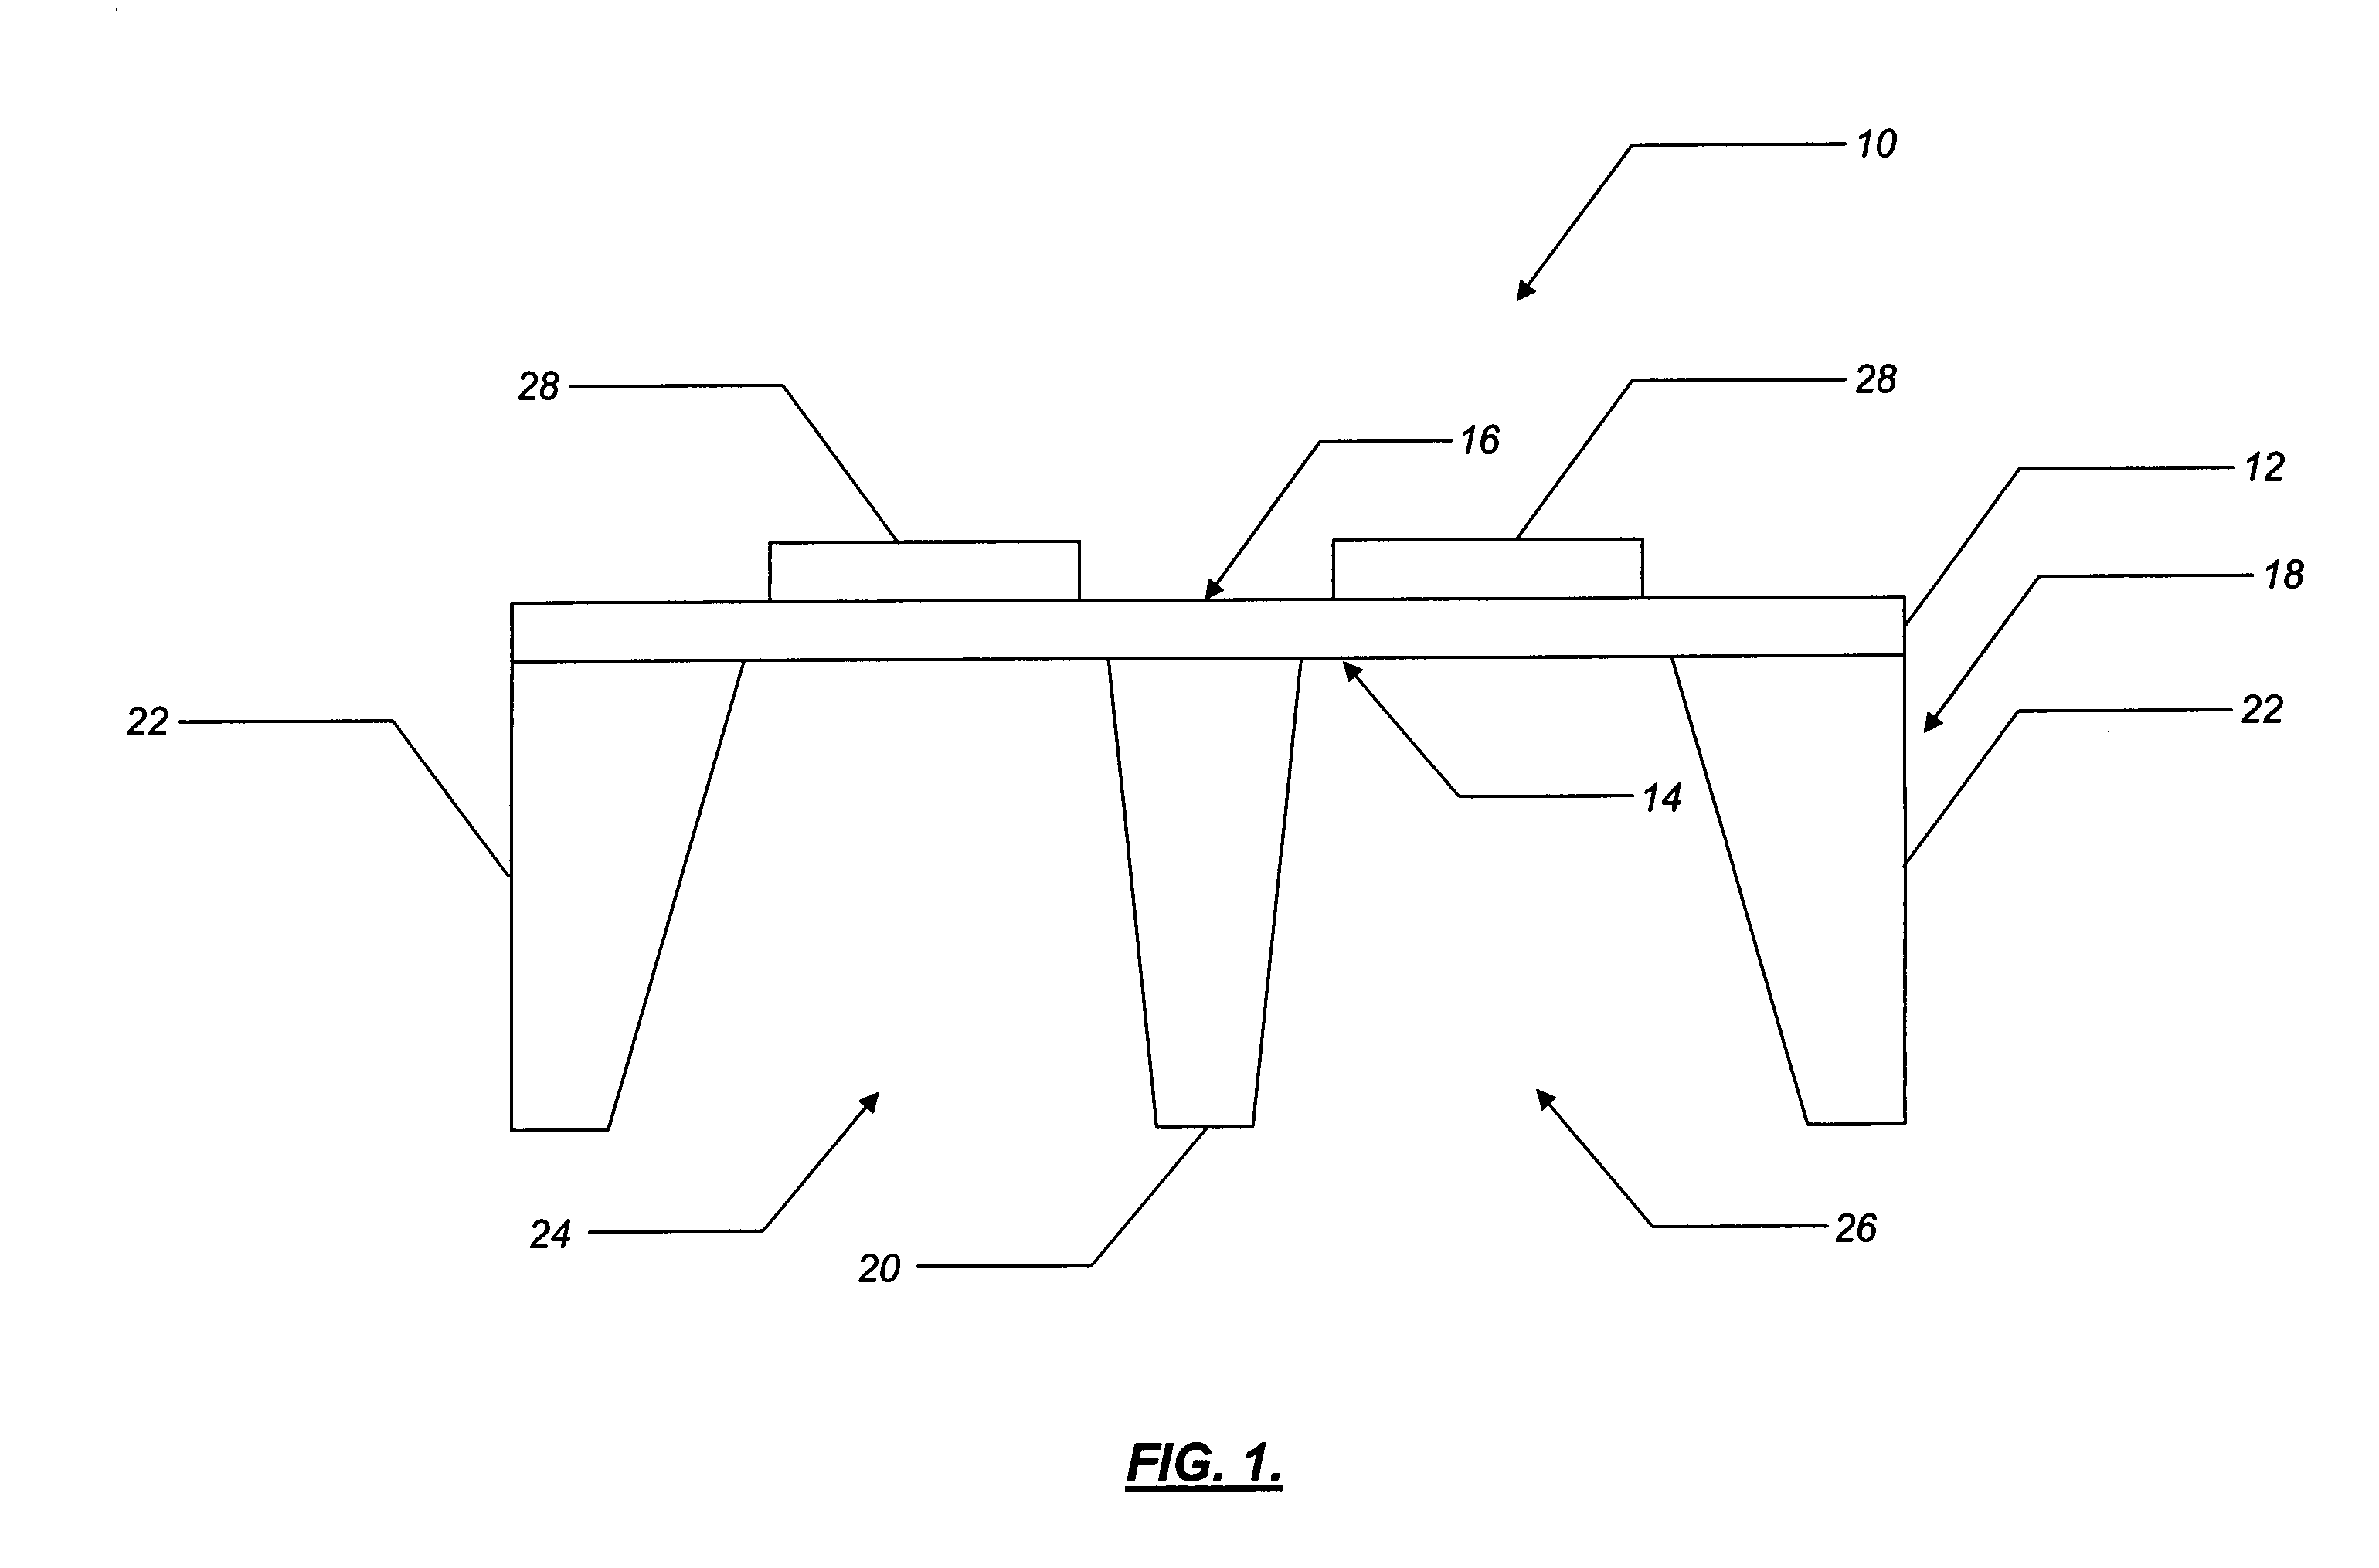 Nano-calorimeter device and associated methods of fabrication and use